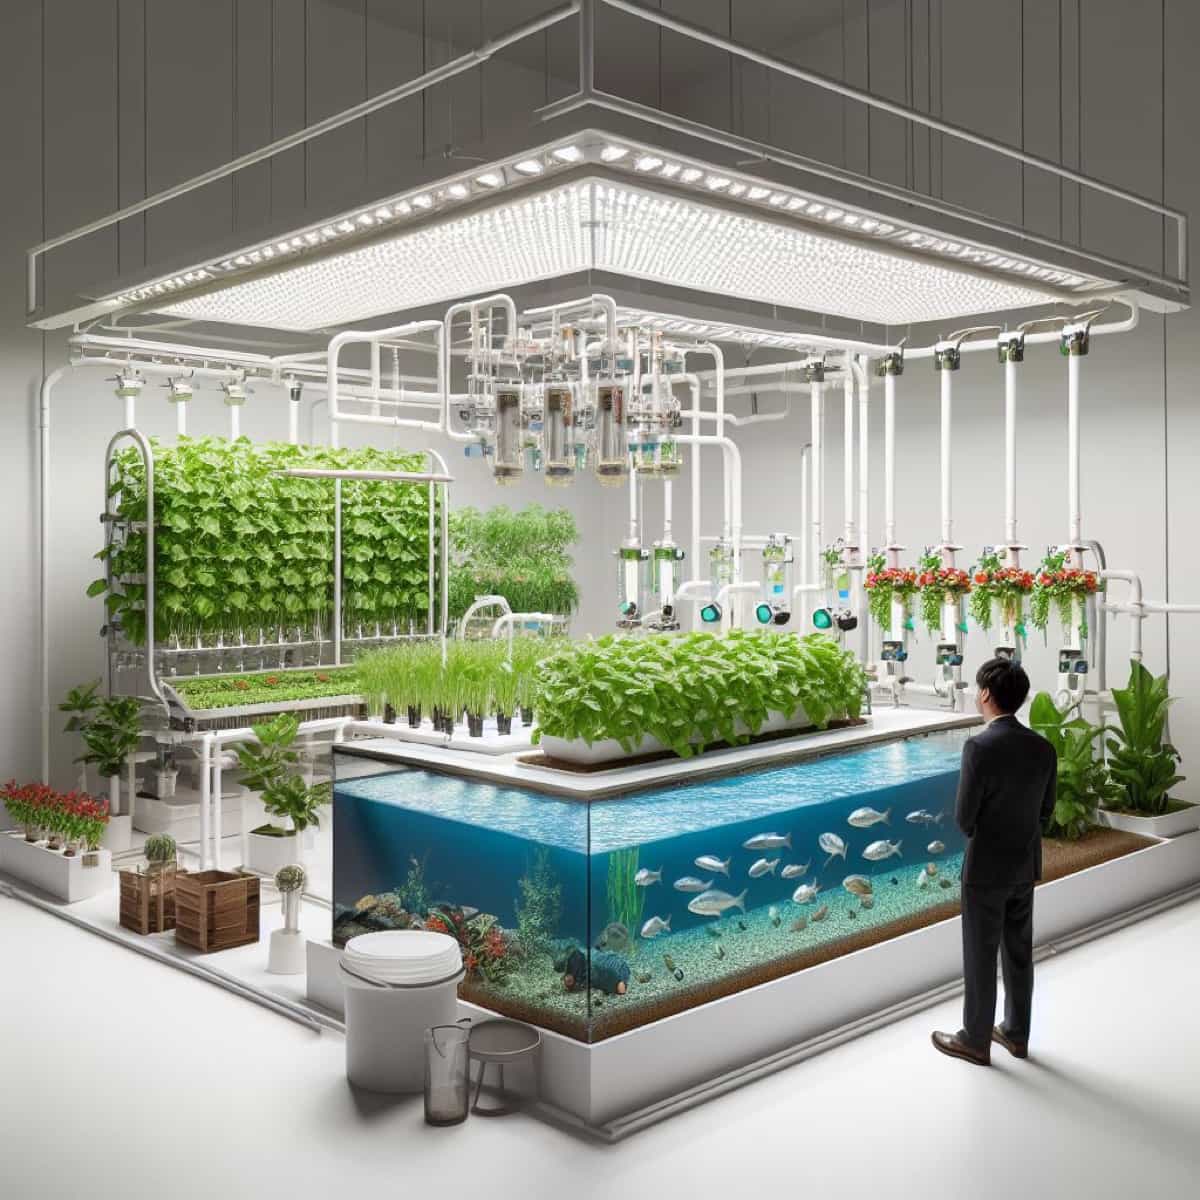 DIY Aquaponic Plans You Can Build in Your Garden